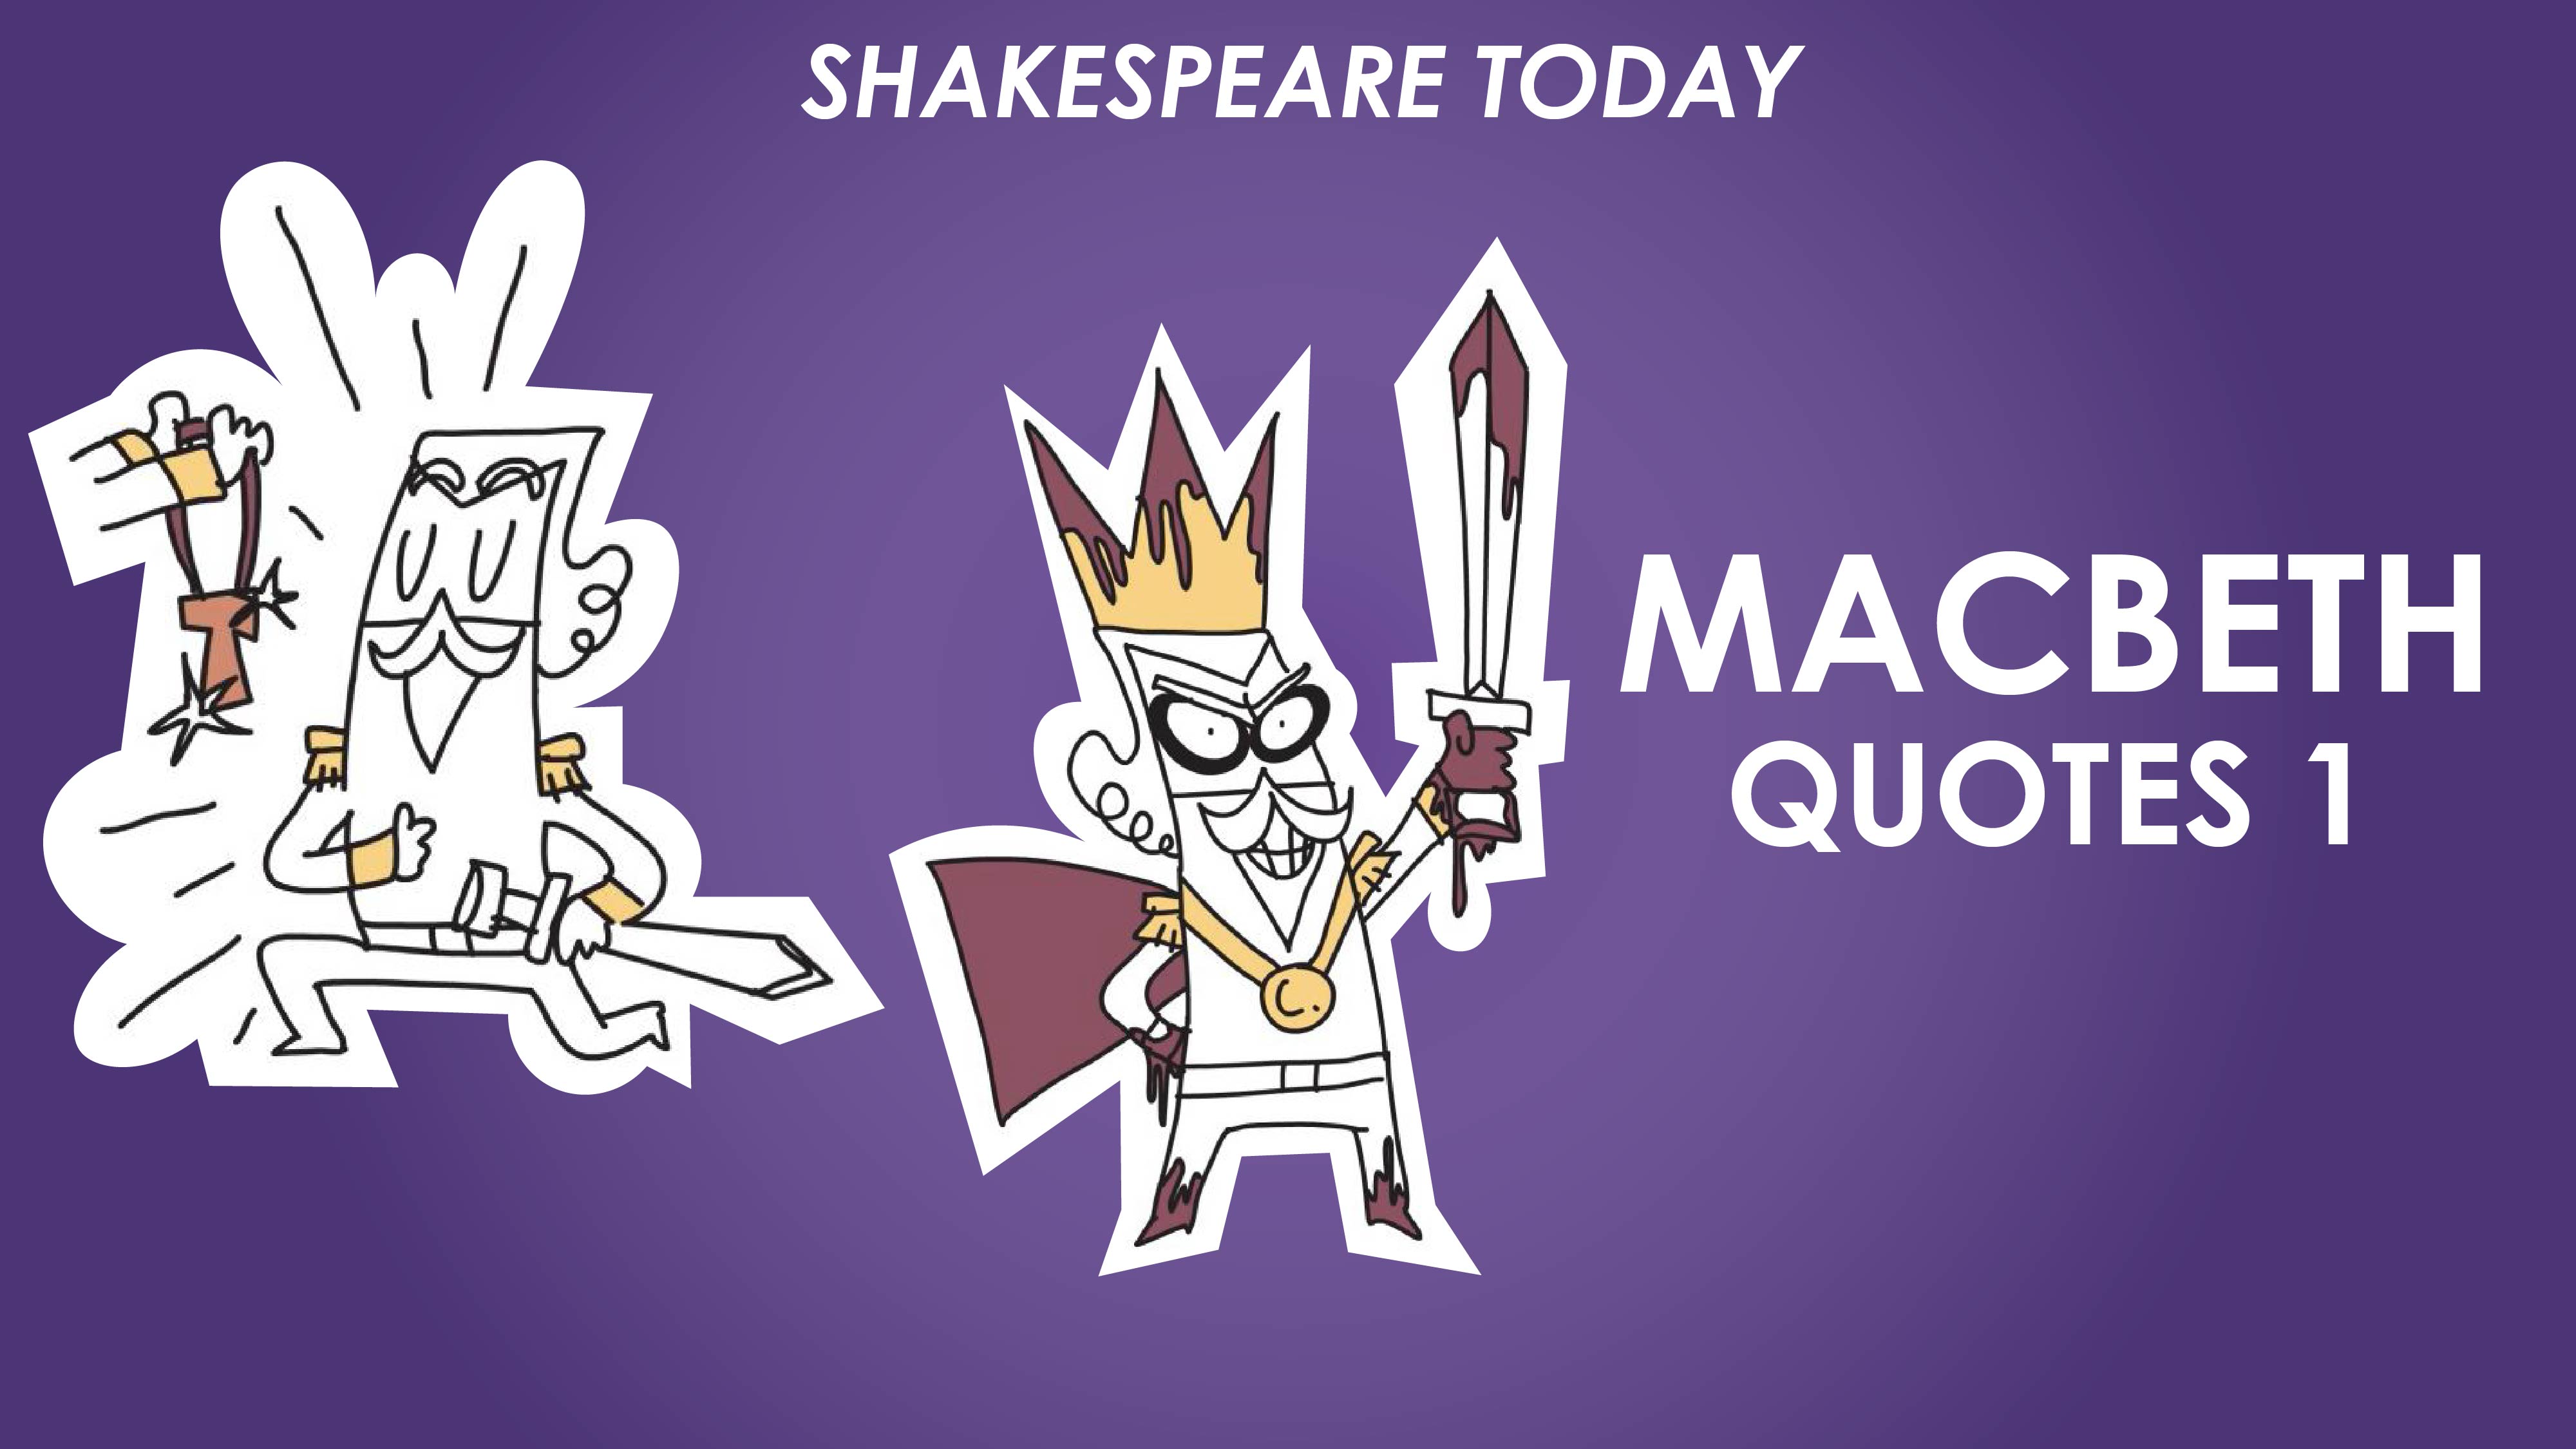 Macbeth Key Quotes Analysis Part 1 - Shakespeare Today Series